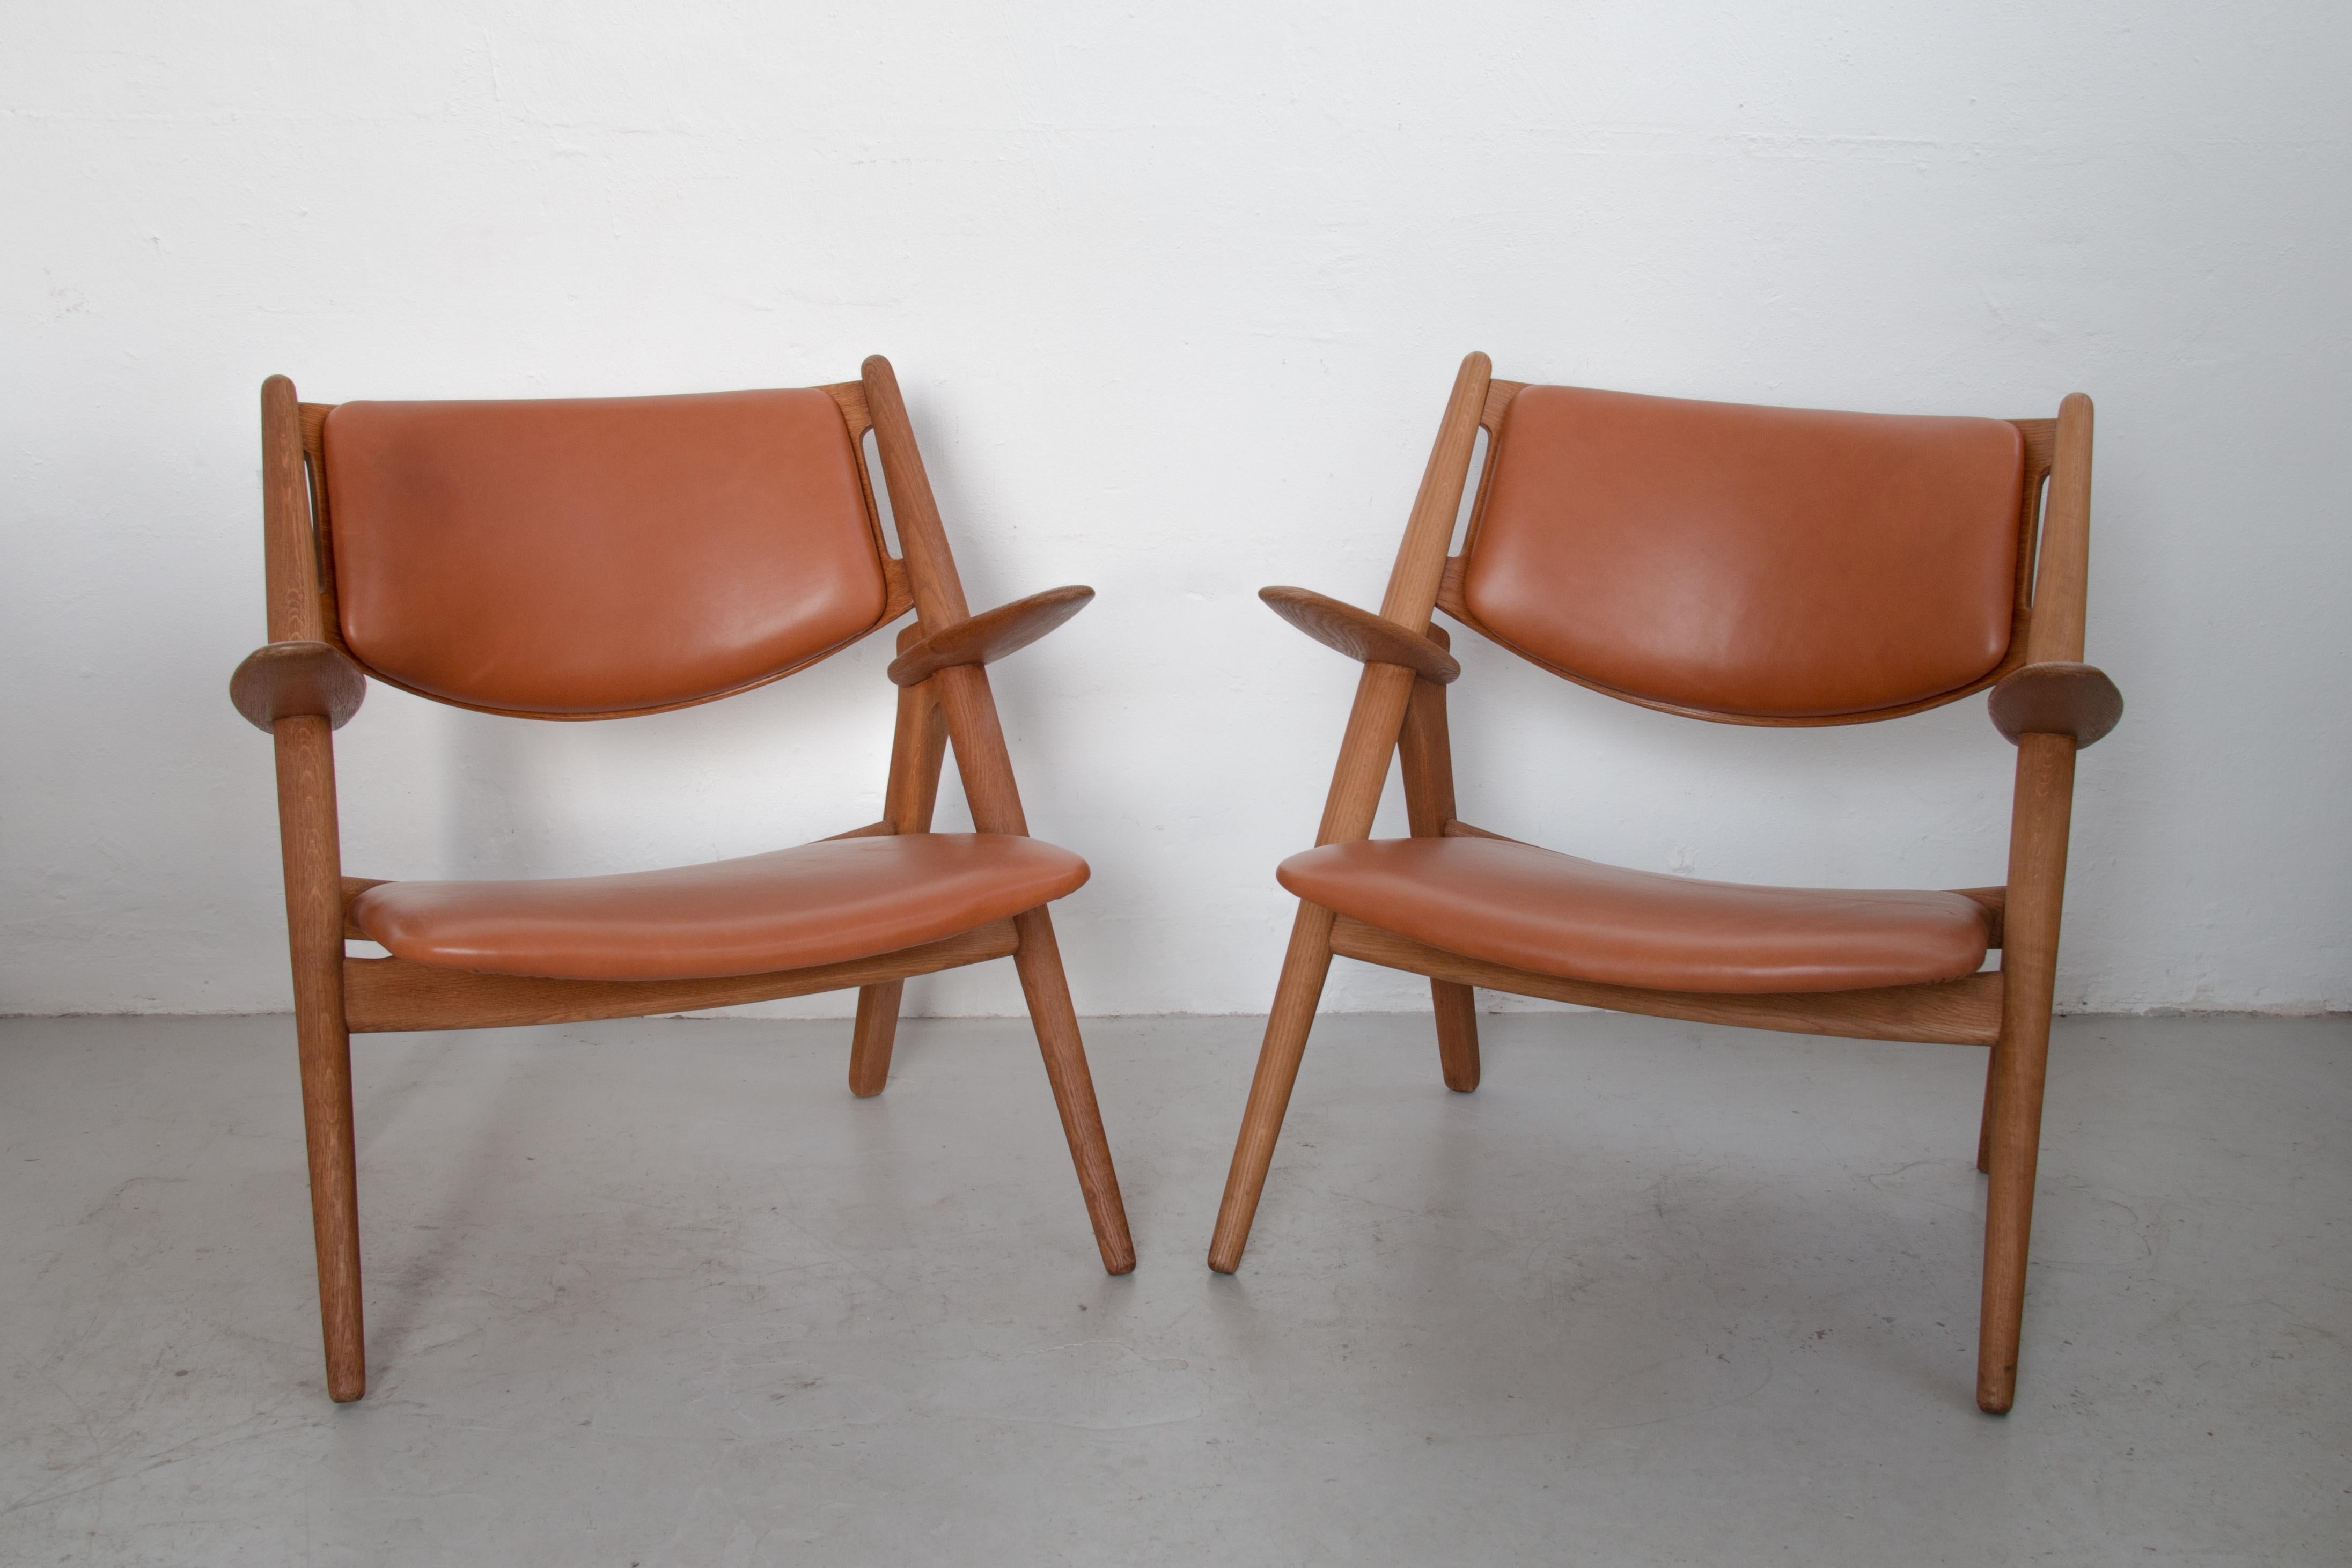 Sawbuck lounge chairs by Hans J. Wegner for Carl Hansen & son
oiled oak and cognac-coloured leather
recently upholstered
early models 